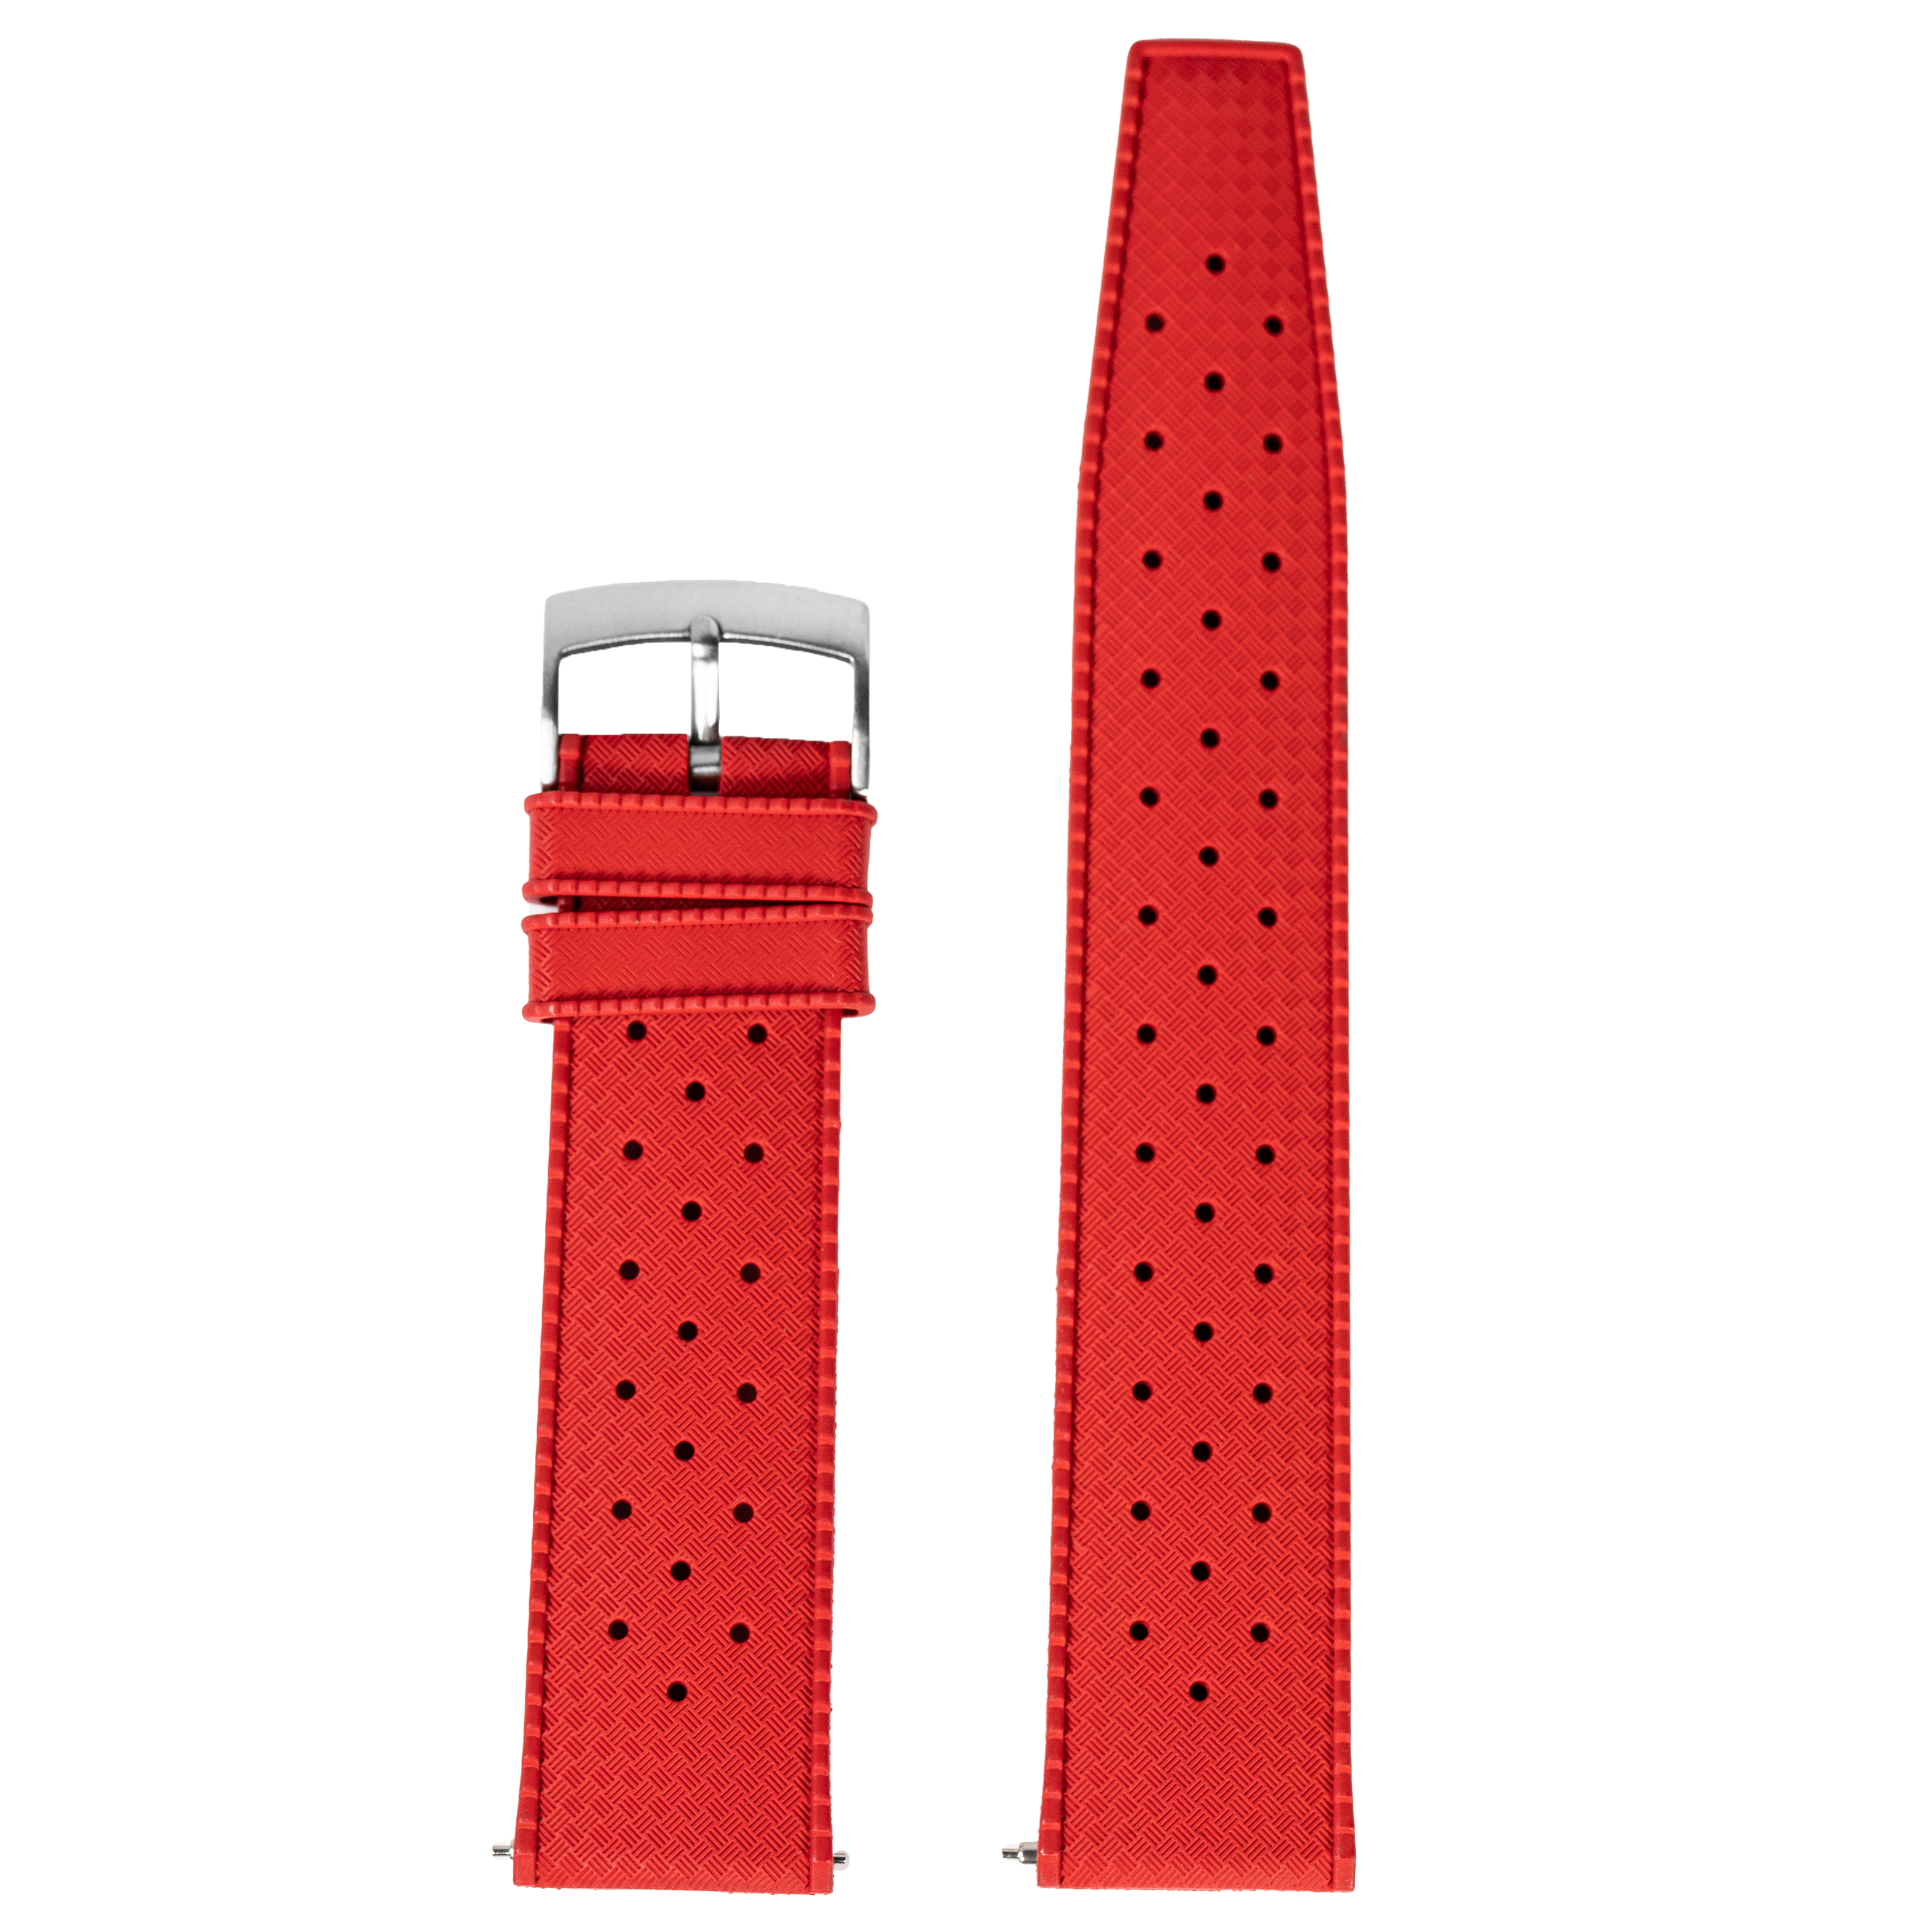 [Quick Release] King Tropic FKM Rubber - Red